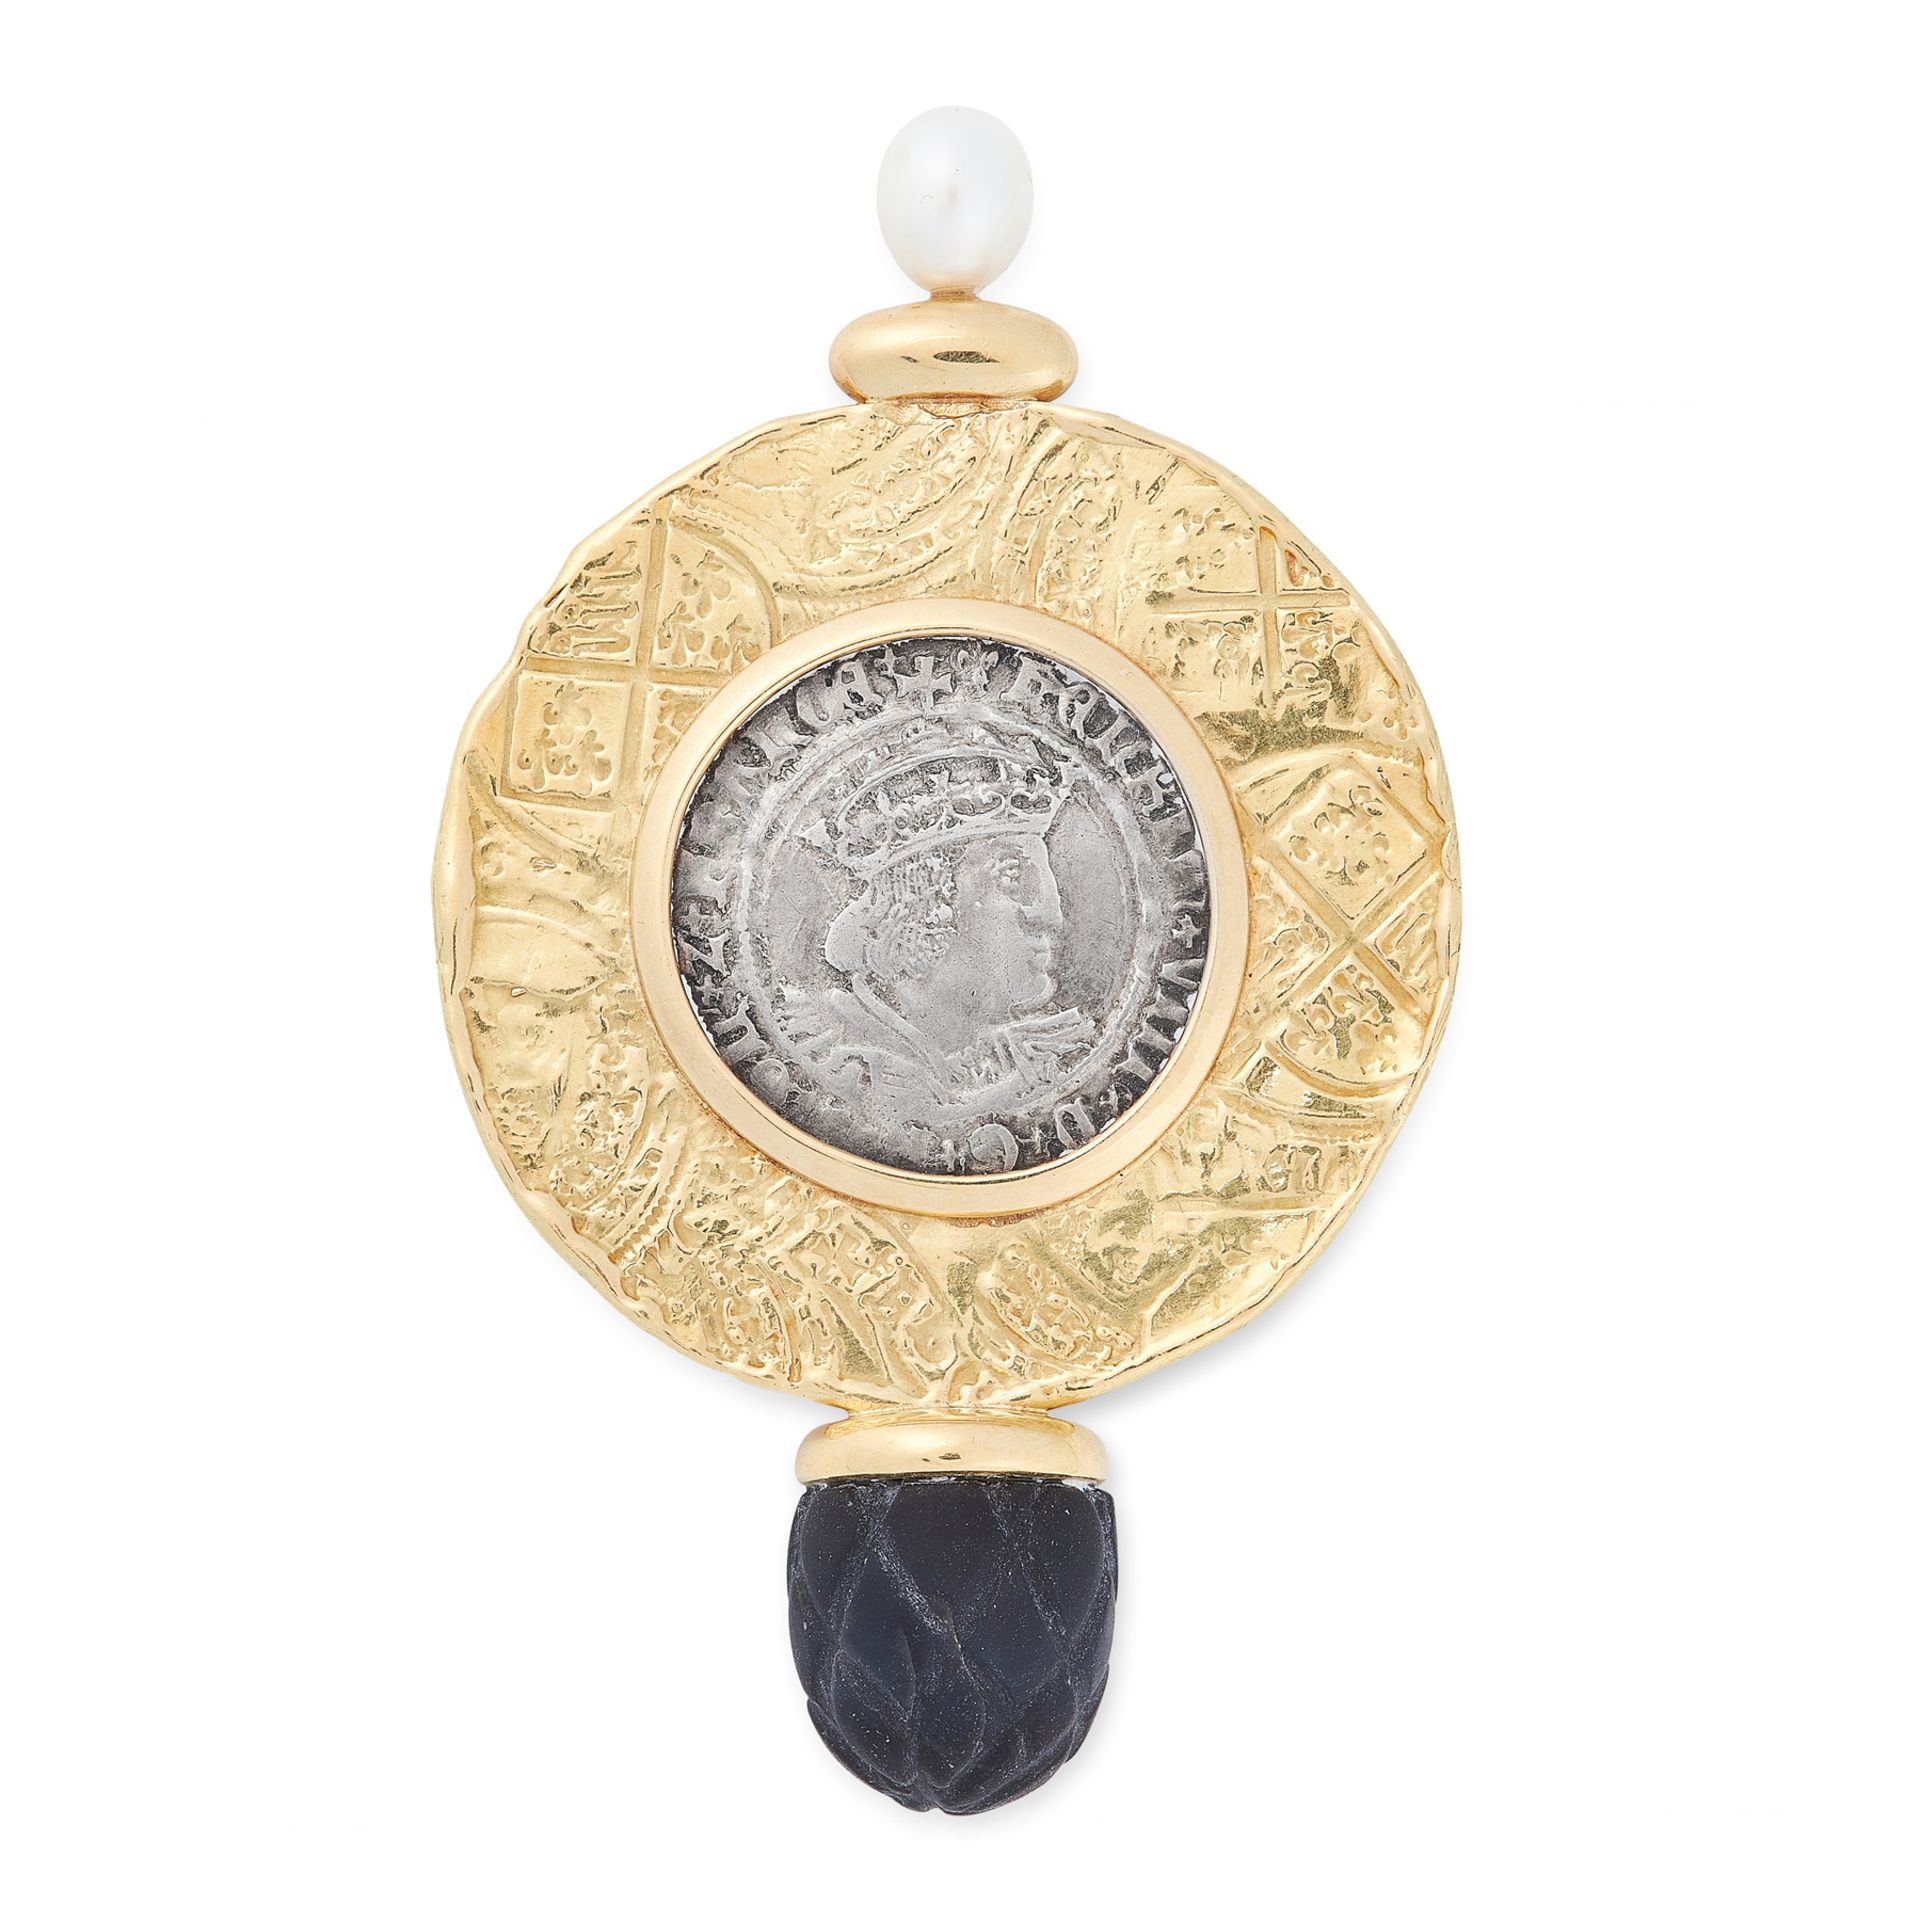 A TUDOR COIN, PEARL AND BLACK HARDSTONE BROOCH, ELIZABETH GAGE, 1993 in 18ct yellow gold, comprising